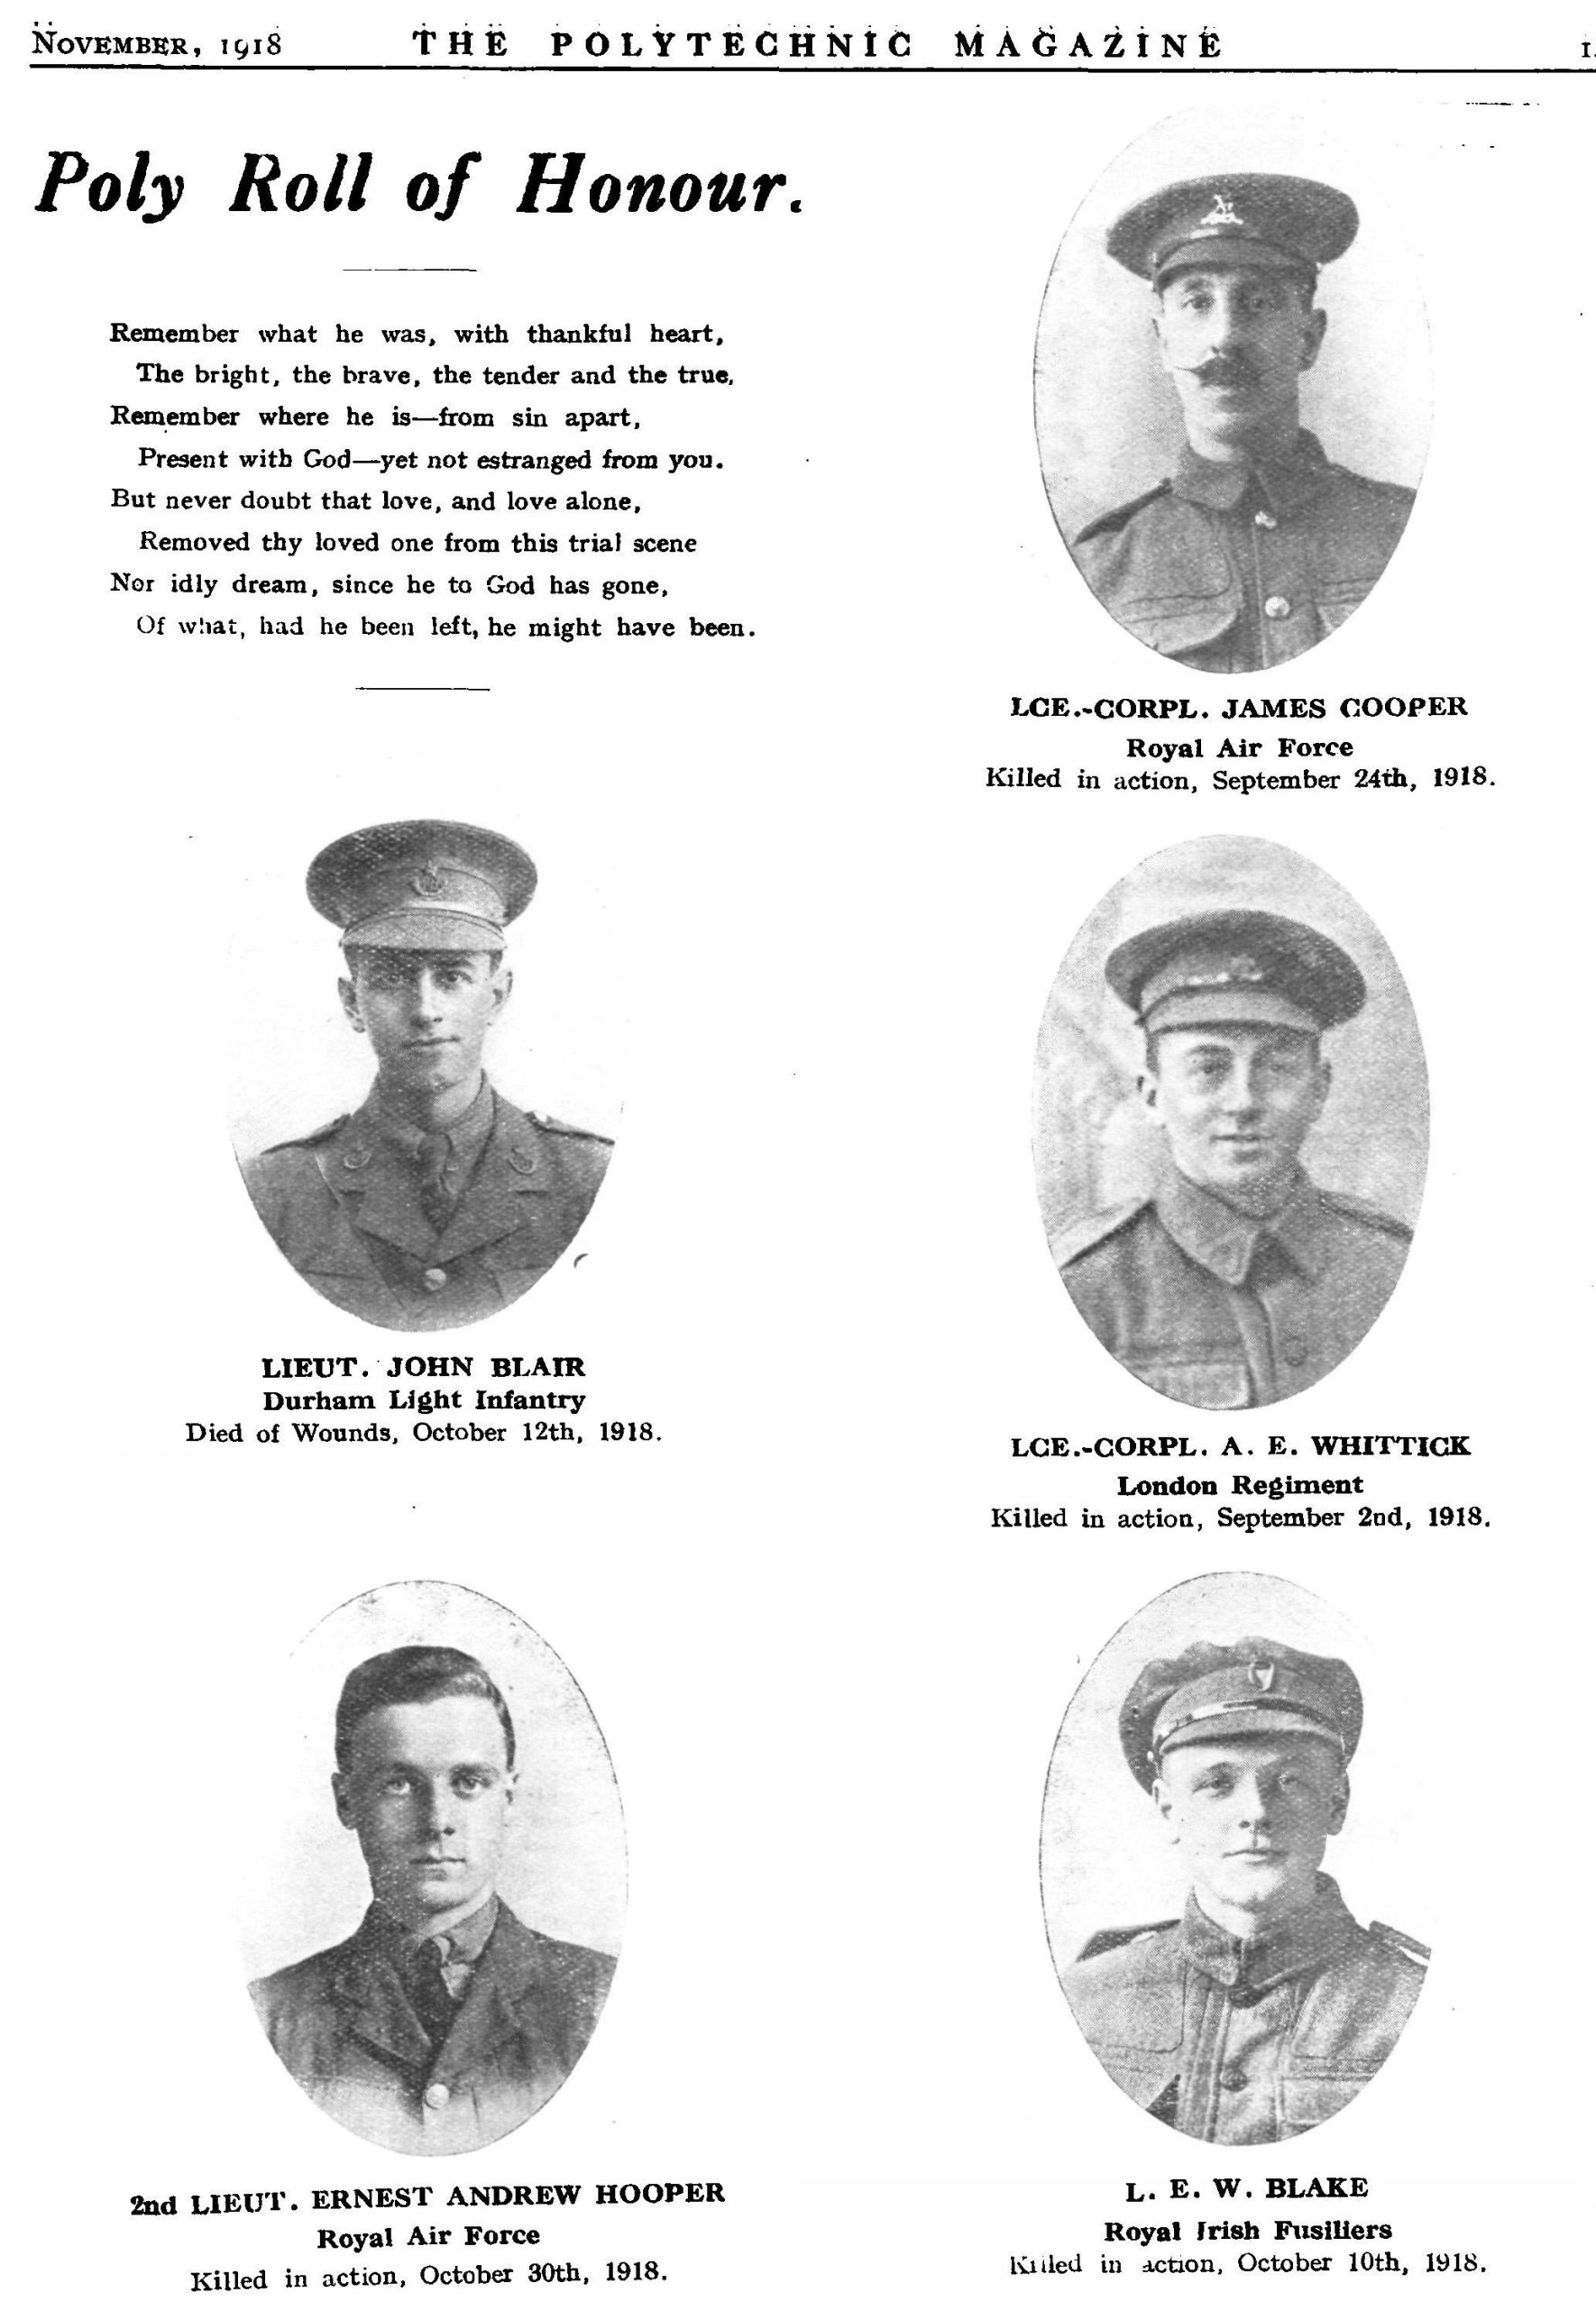 Poly Roll of Honour page from the Polytechnic Magazine featuring photos and brief text about soldiers, November 1918